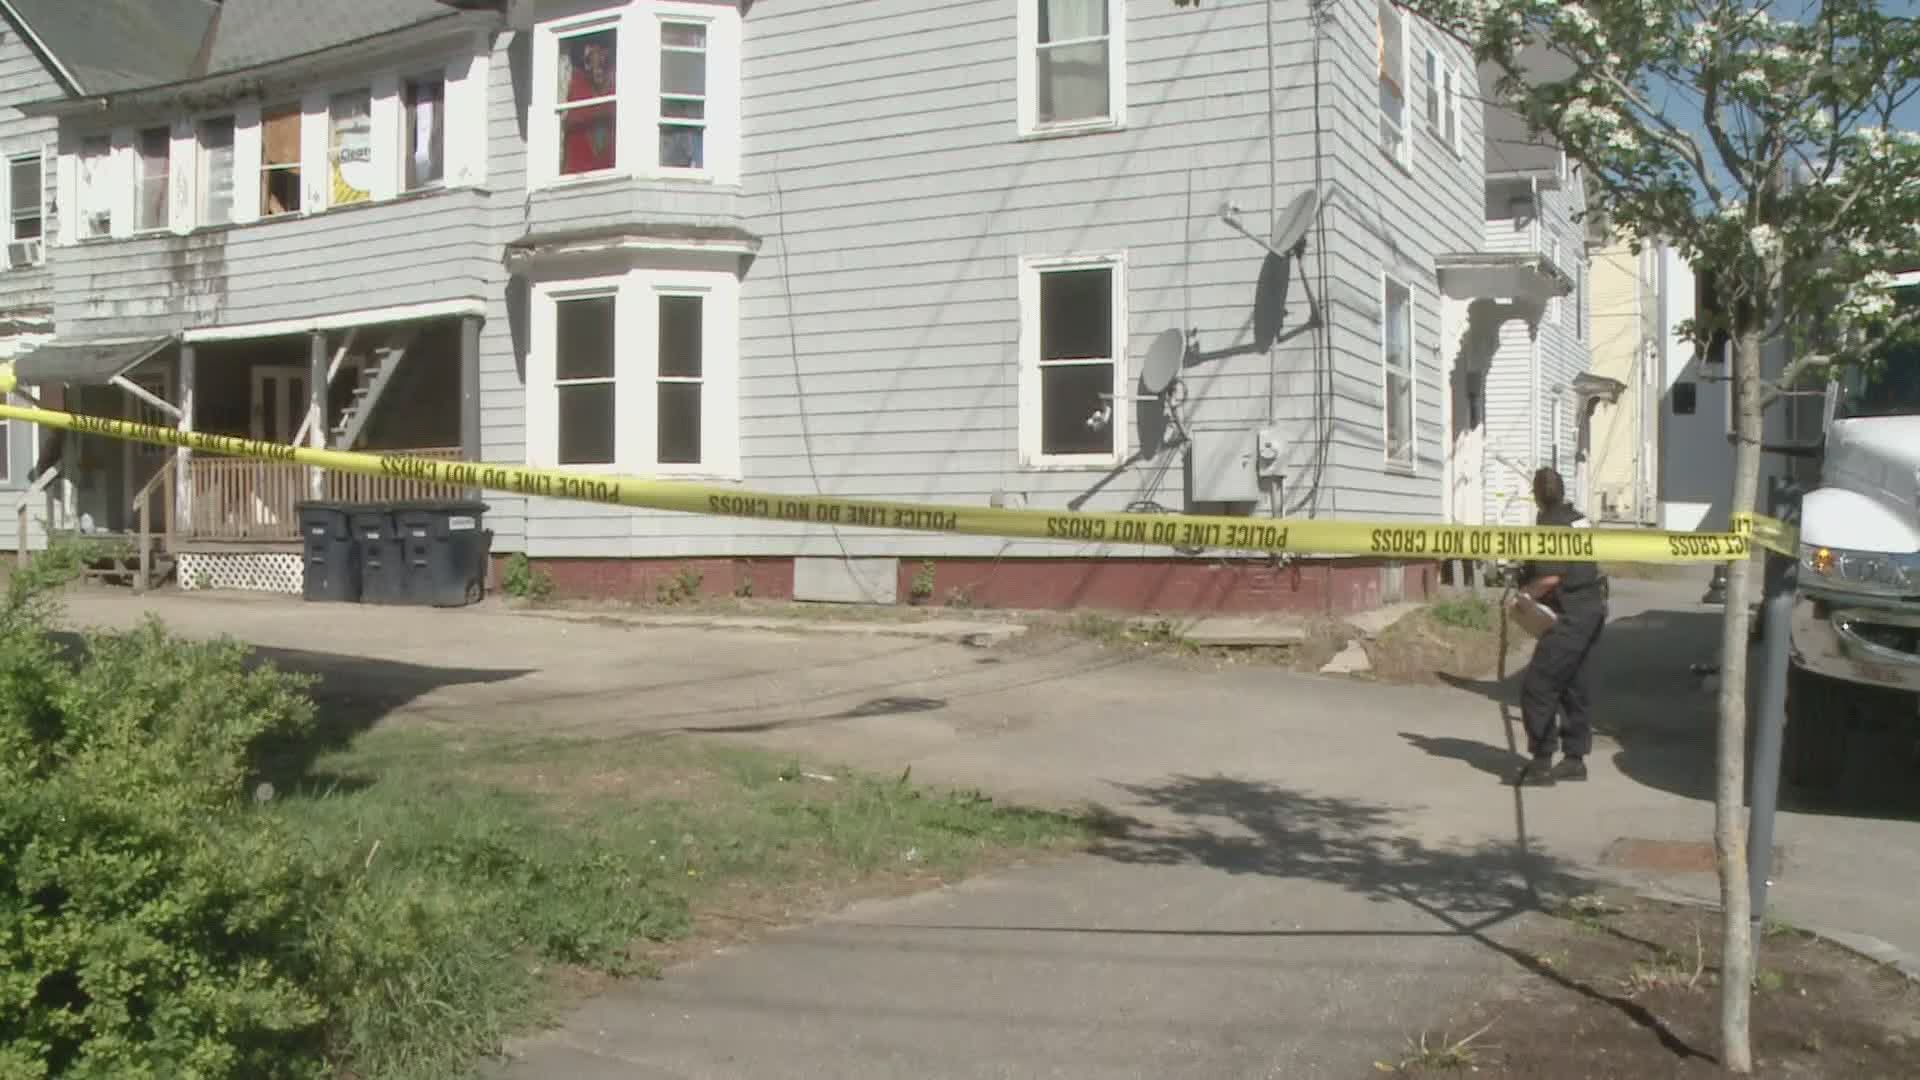 Man killed in apparent altercation in Auburn; police searching for other man involved